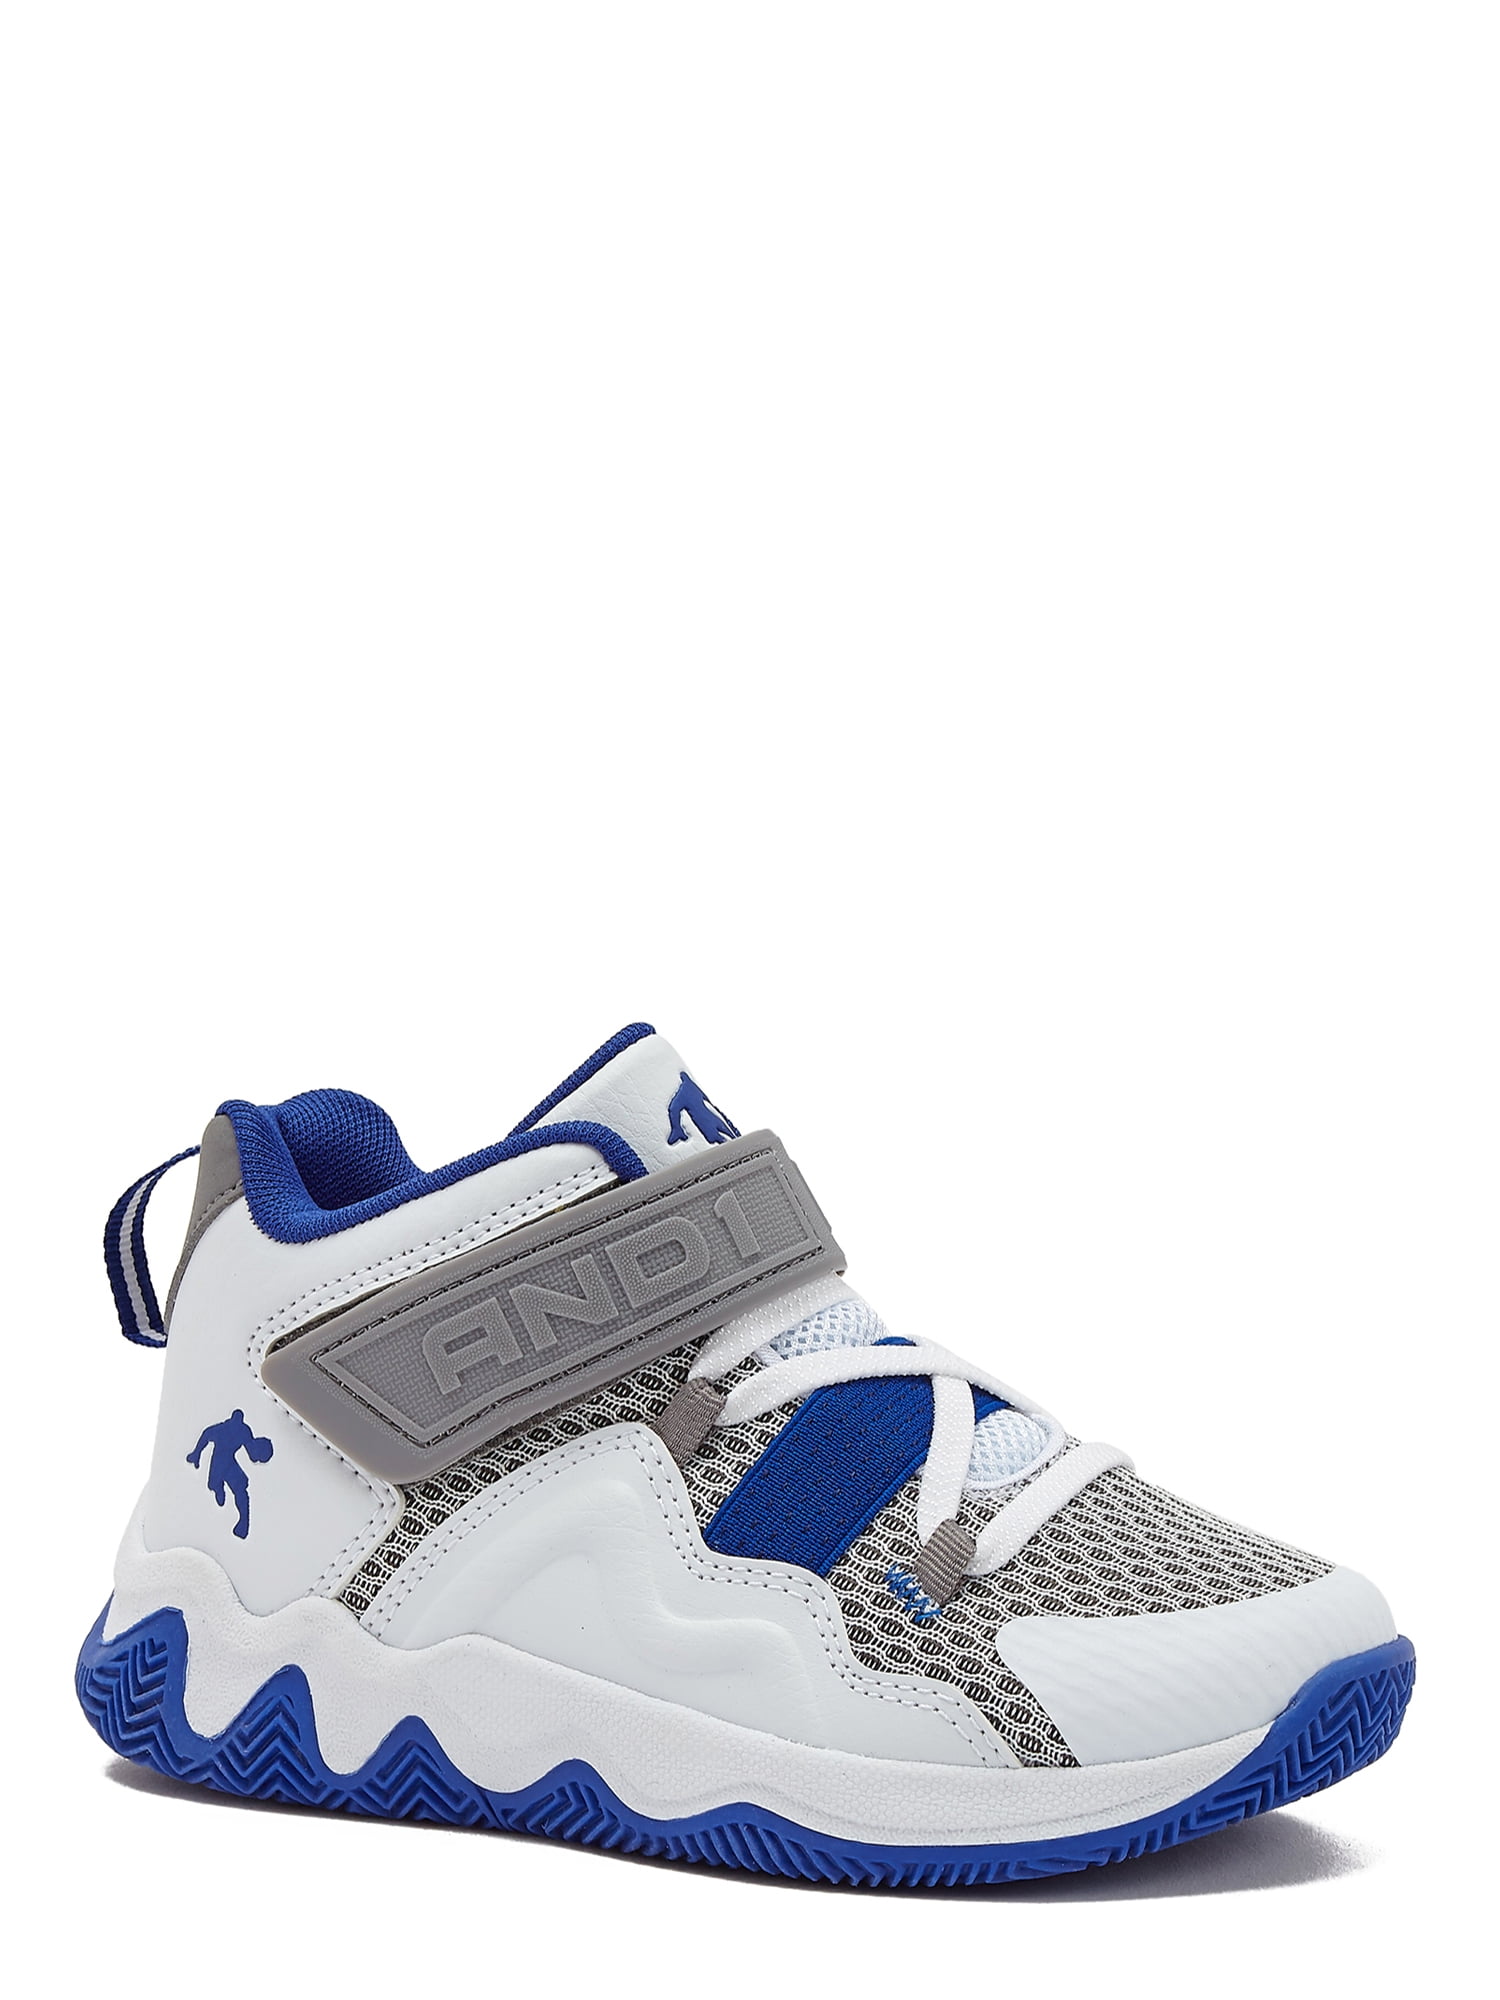 AND1 Little & Strap Sneakers, Sizes 13-6 - Walmart.com